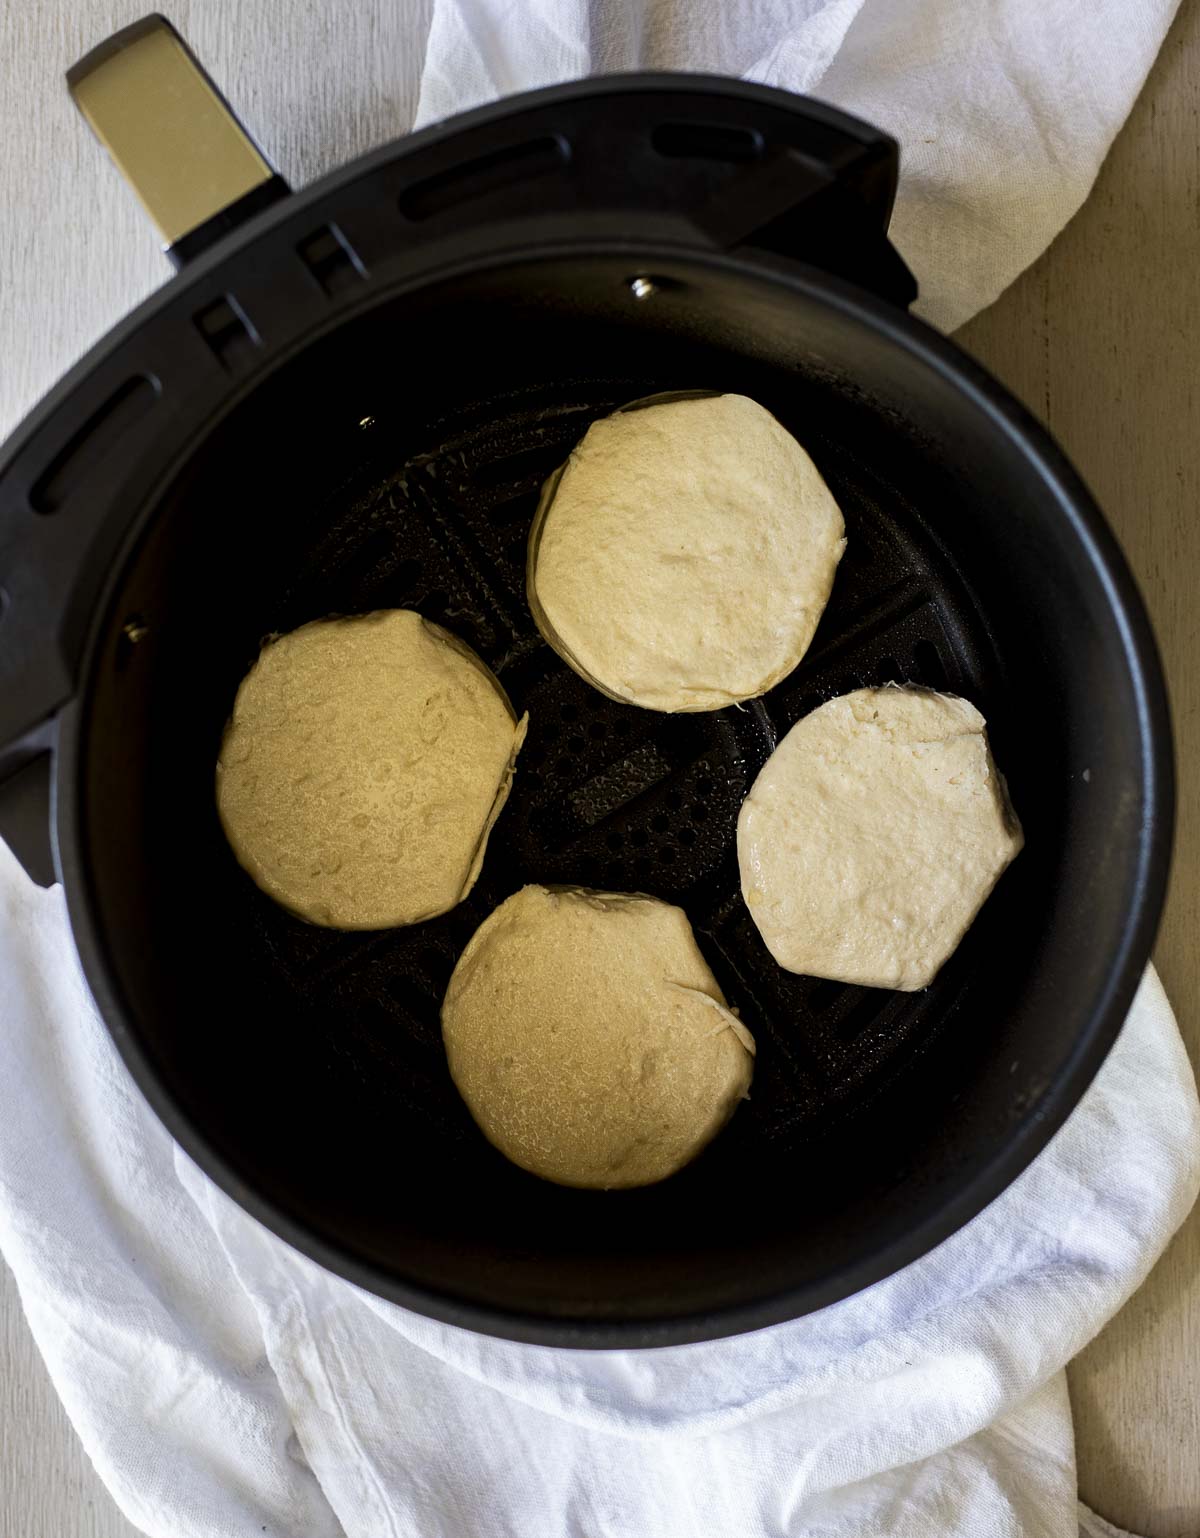 Biscuit dough added to an air fryer basket.